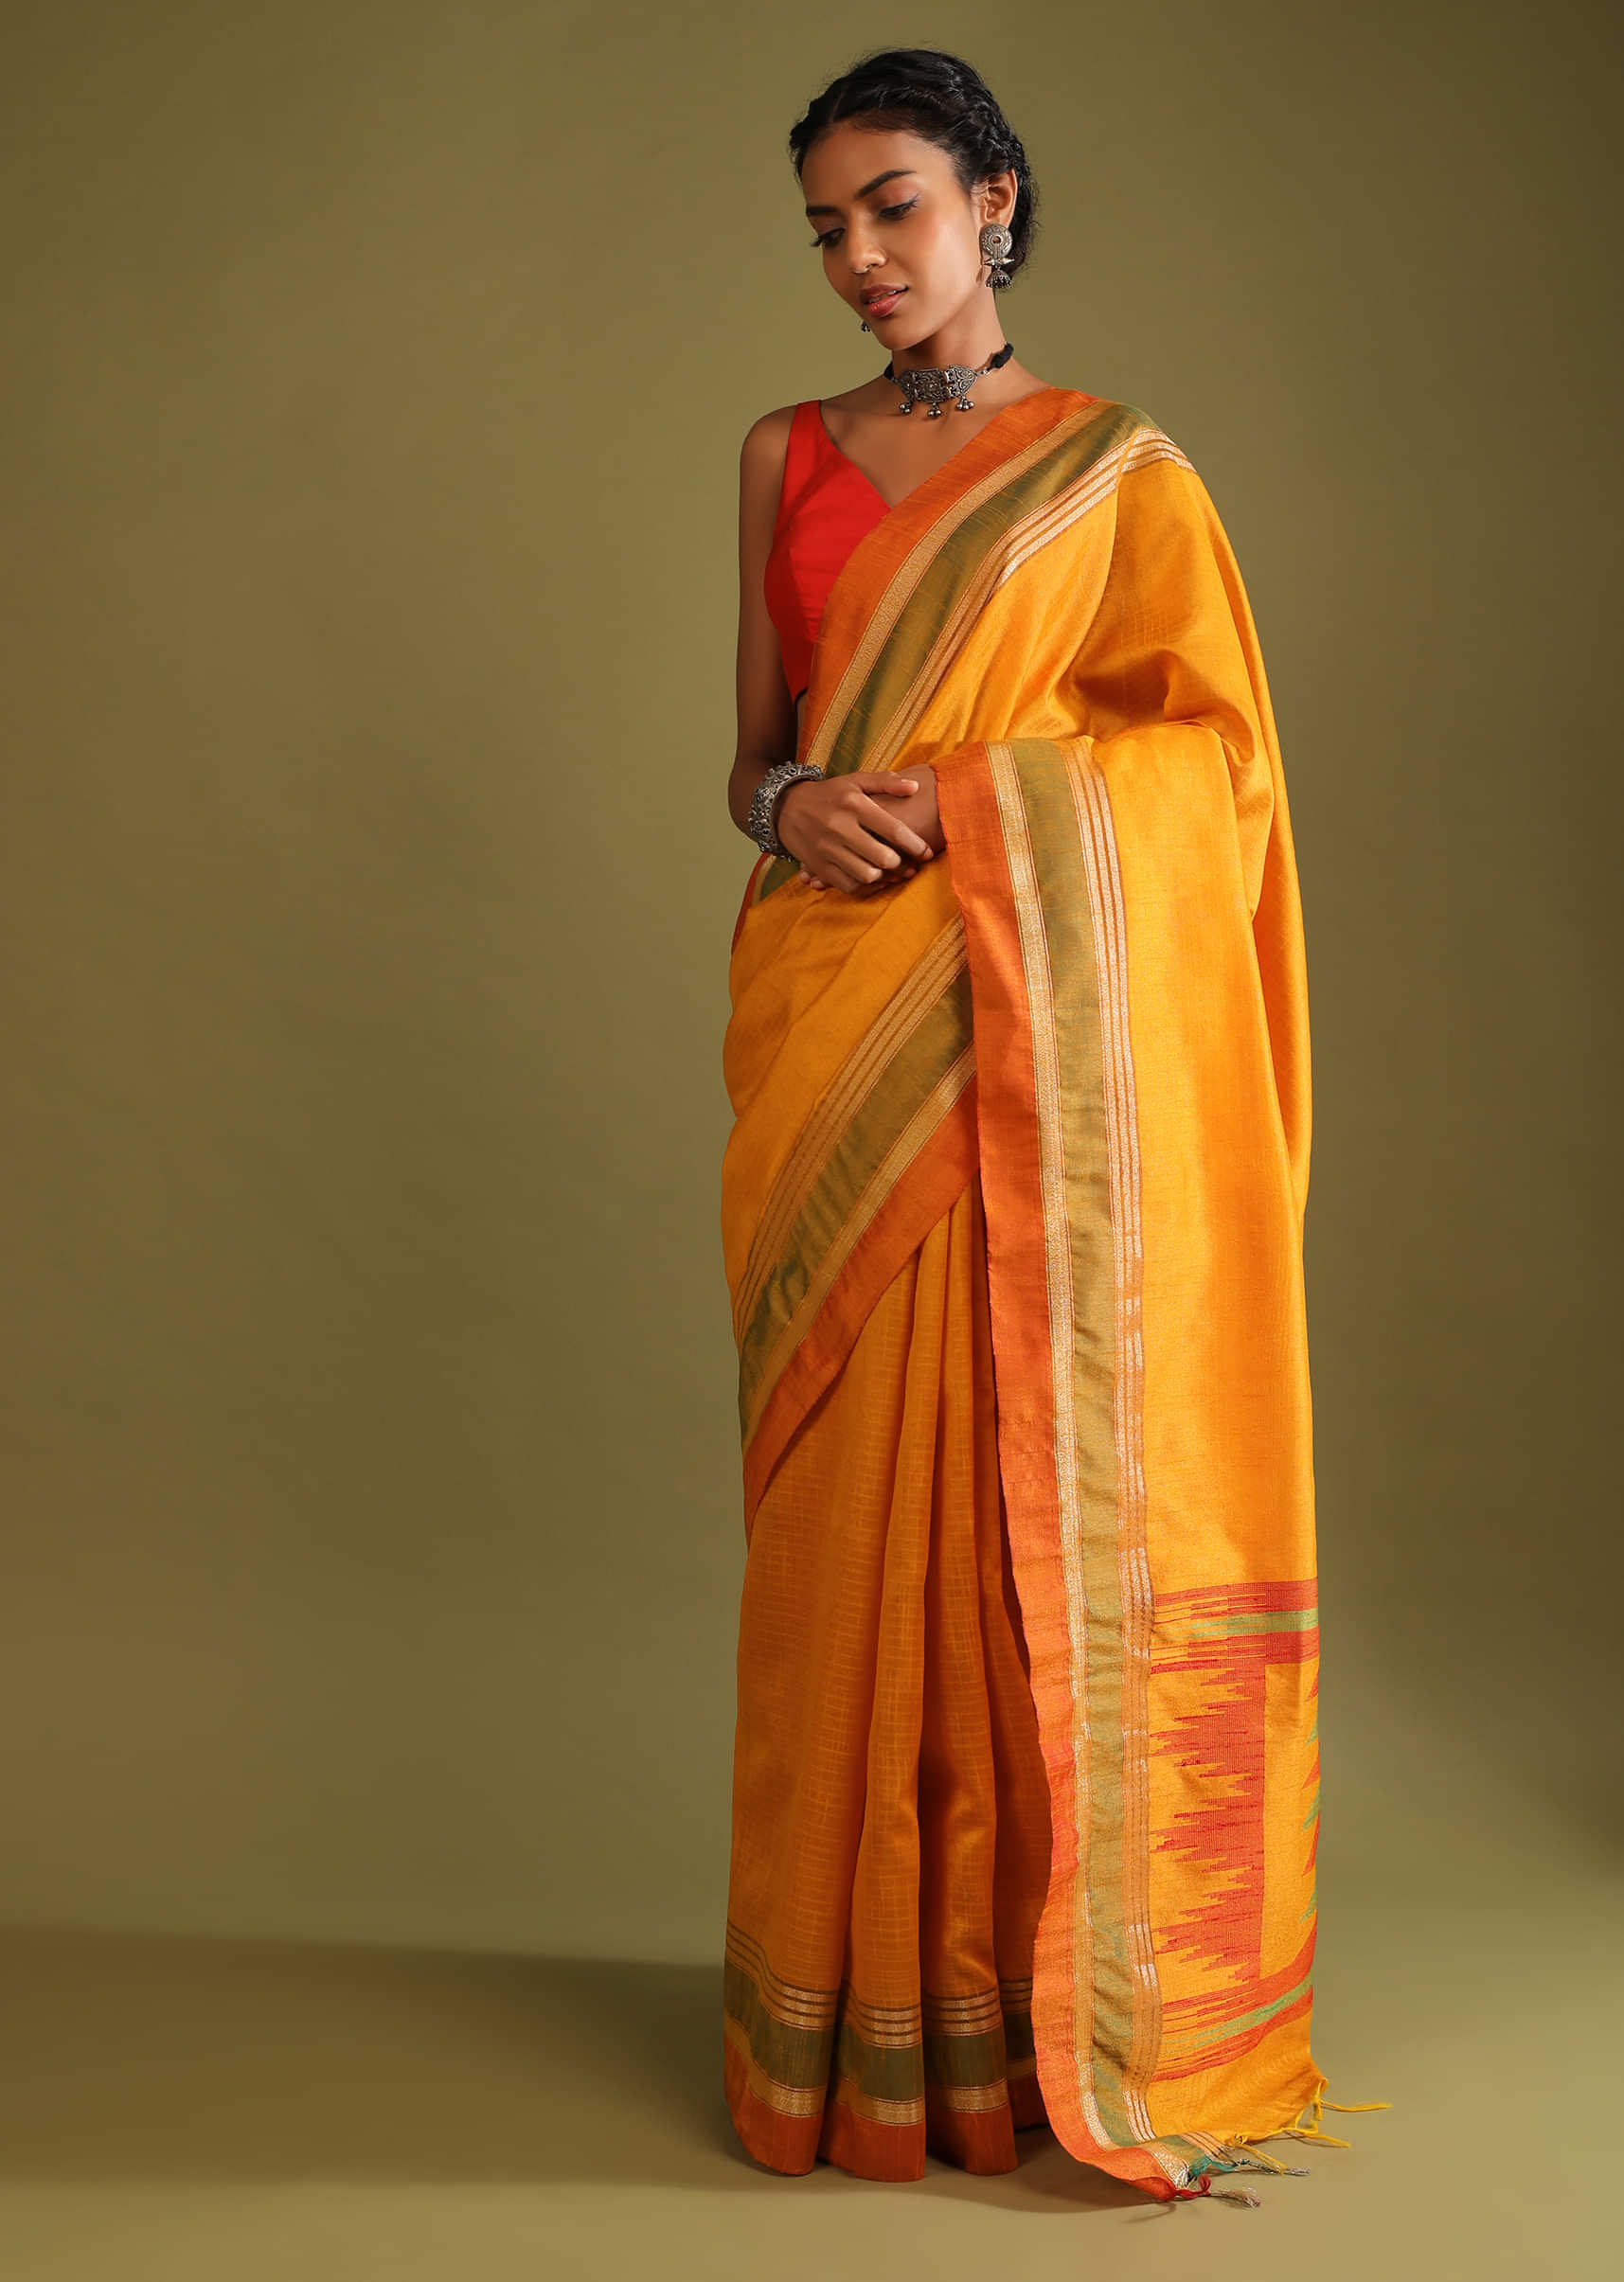 Golden Oak Yellow Saree In Tussar Silk With Multi Colored Thread Embroidered Abstract Design On The Pallu  